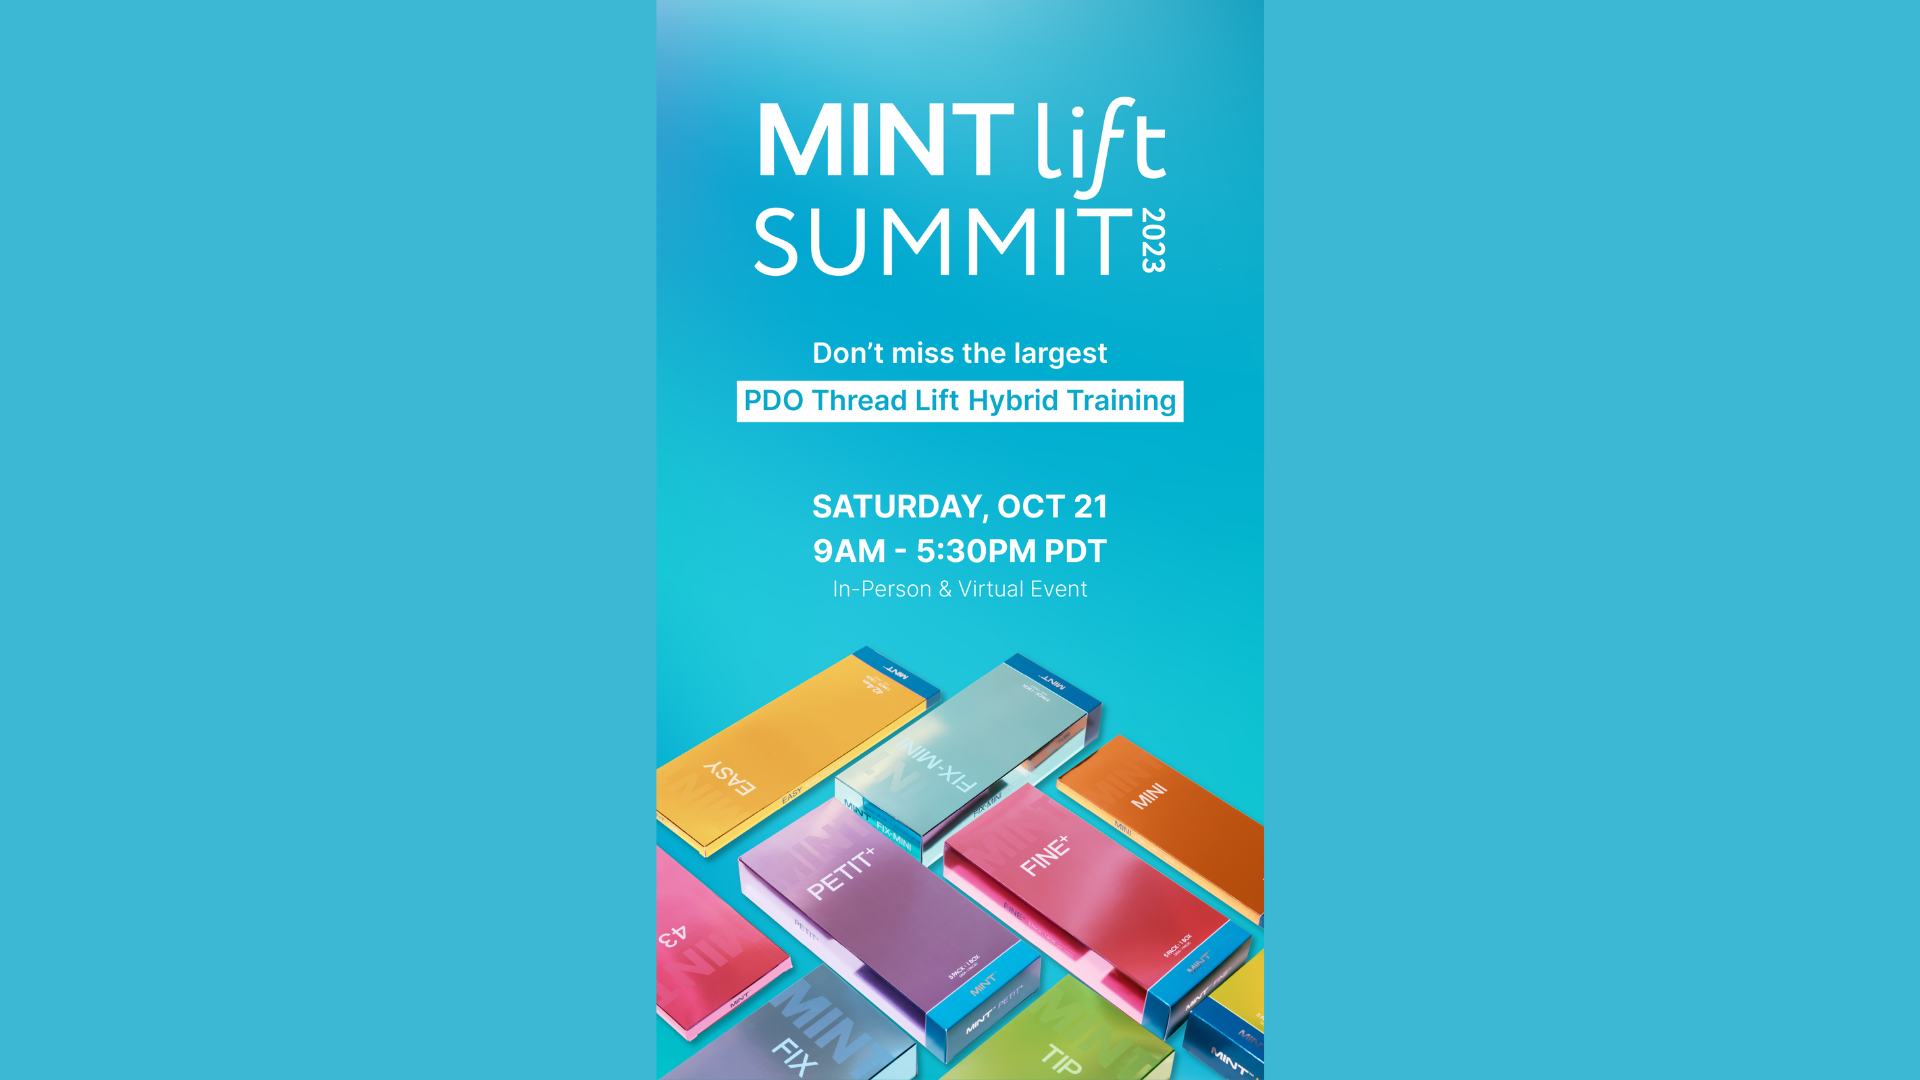 Flyer for the MINT Lift Summit PDO thread lift event